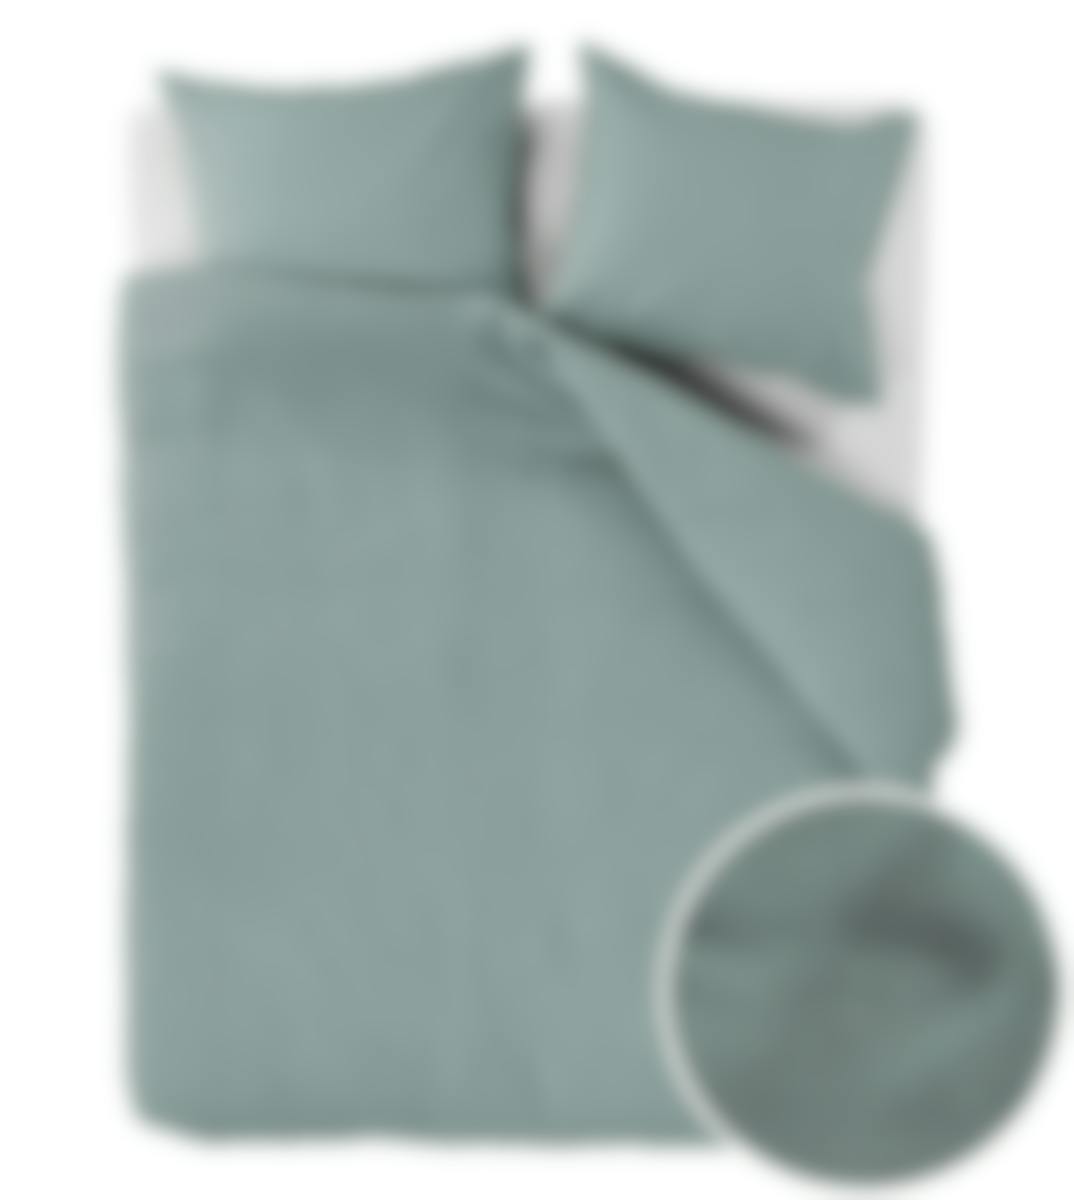 At Home by Beddinghouse housse de couette Relax Grey Green Waffle 240 x 200-220 cm